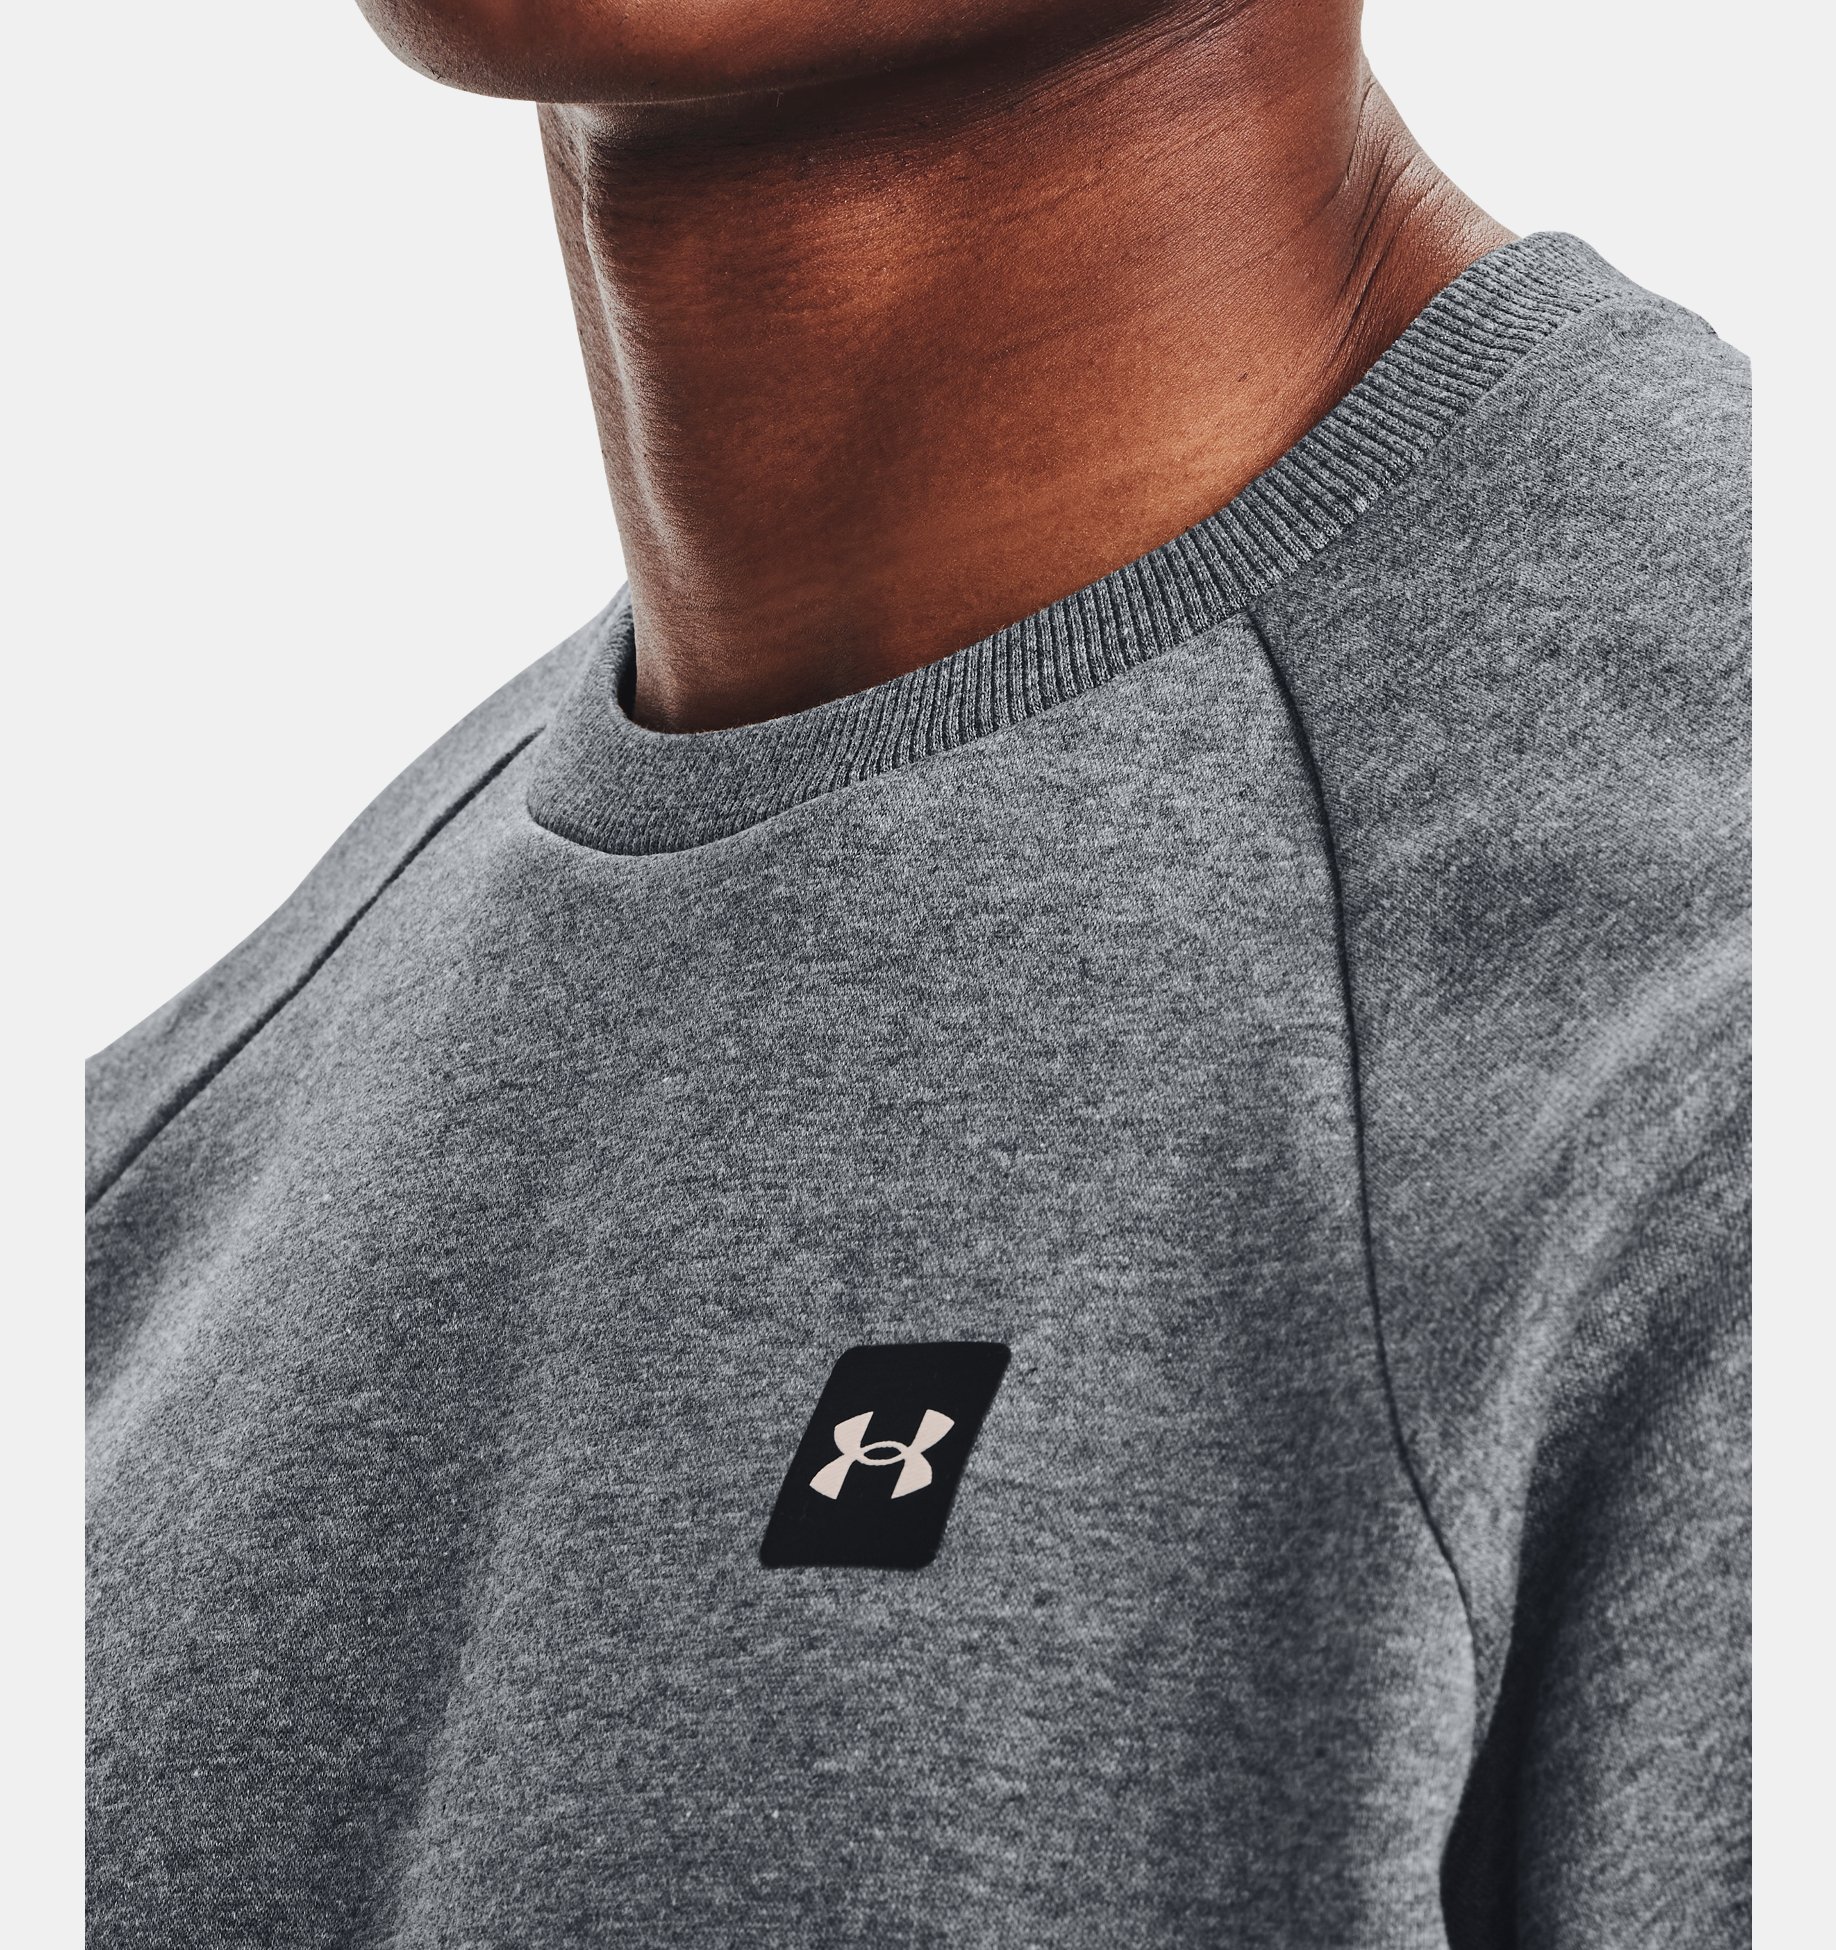 Under Armour Mens Rival Fleece Crew Neck Sweat/Jumper Gym Pullover Teal Vibe 